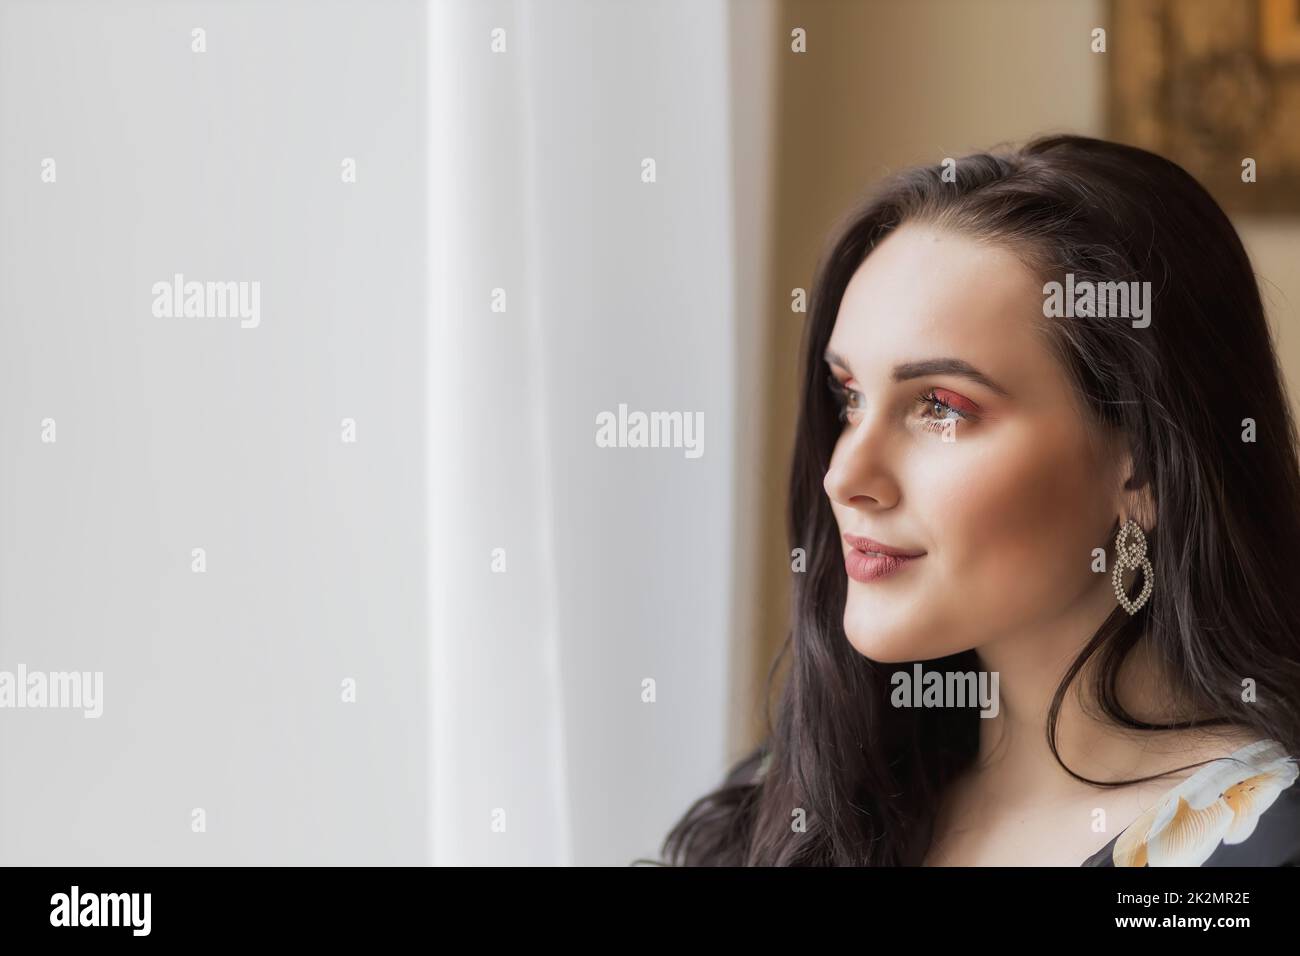 Side view portrait of atractive dark haired young woman. Stock Photo